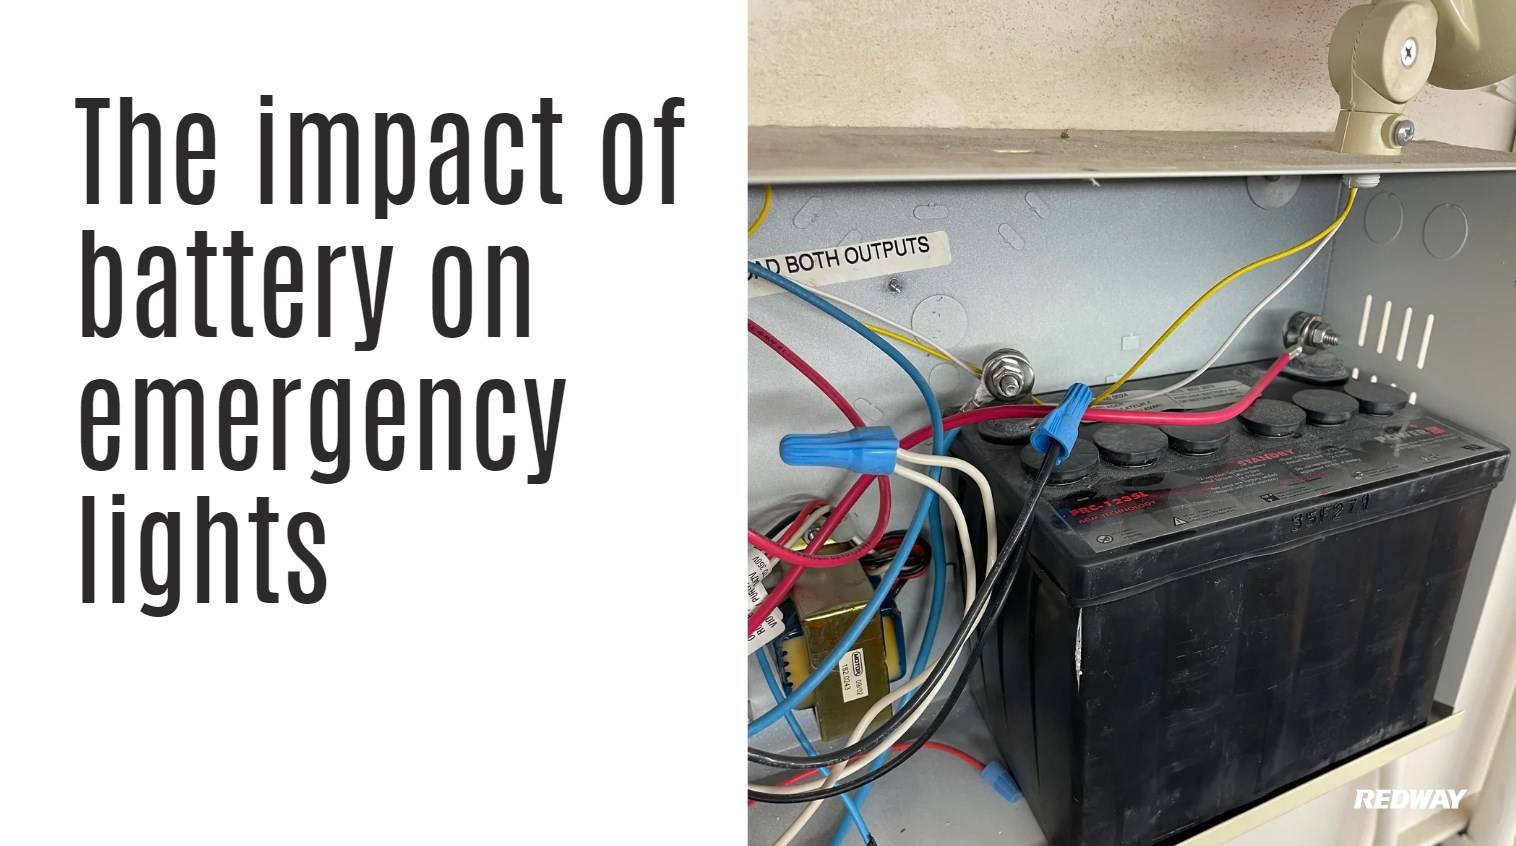 The impact of battery on emergency lights. Do emergency lights drain battery?